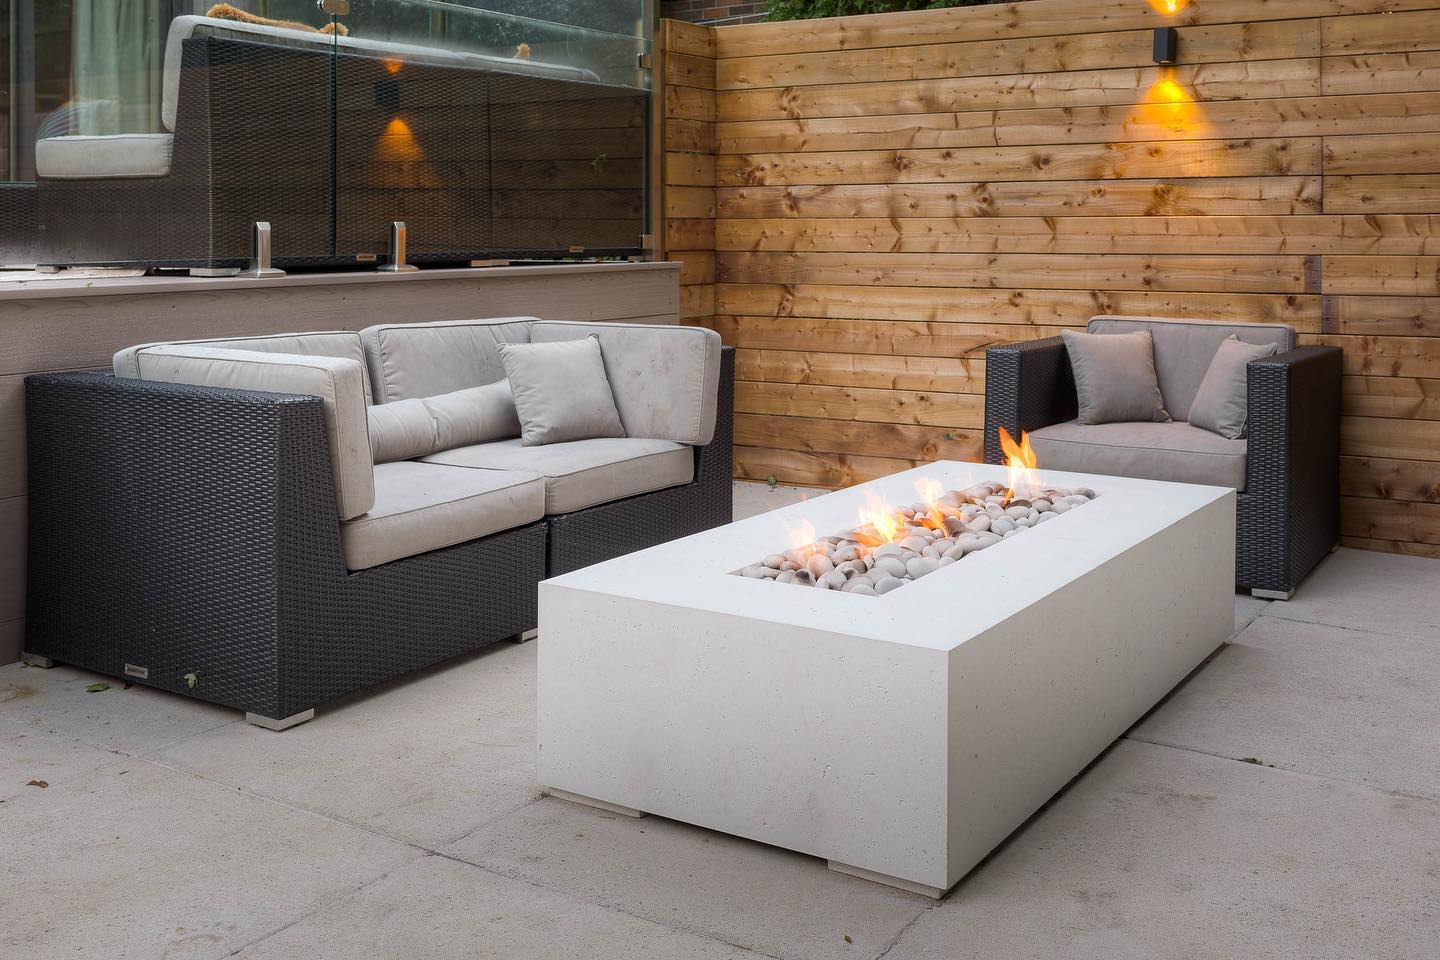 An outdoor concrete patio with a sofa and armchair around a Dekko Sonoma fire pit, lit by a light fixture on a wooden wall.